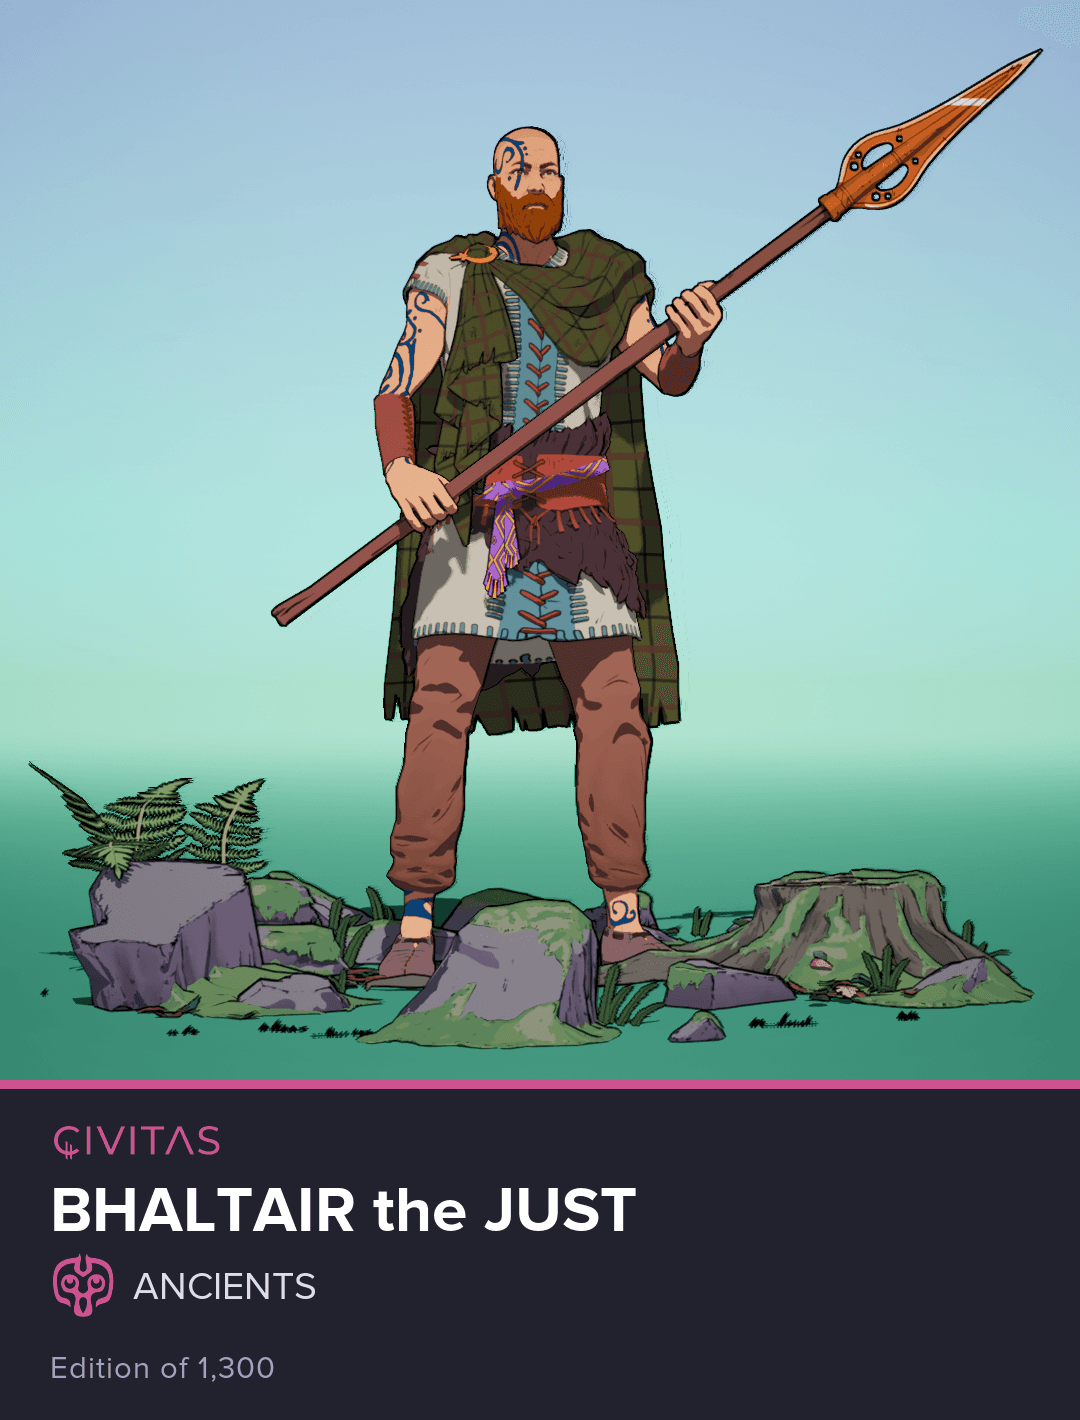 Bhaltair the Just #269